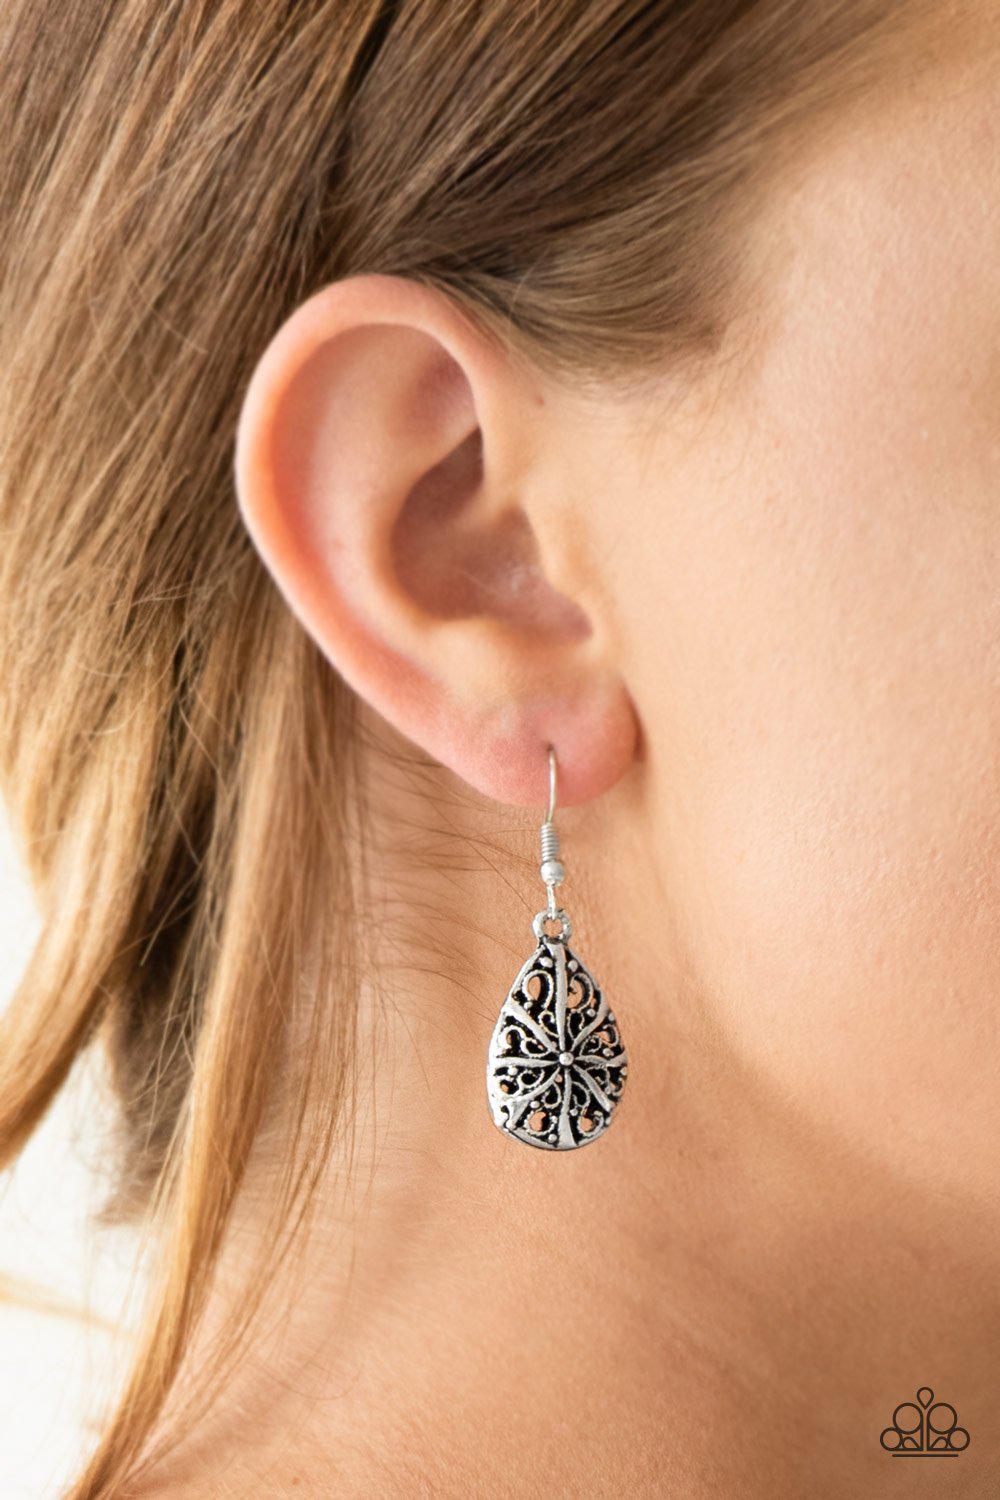 Western Wisteria Silver Earrings - Paparazzi Accessories-CarasShop.com - $5 Jewelry by Cara Jewels